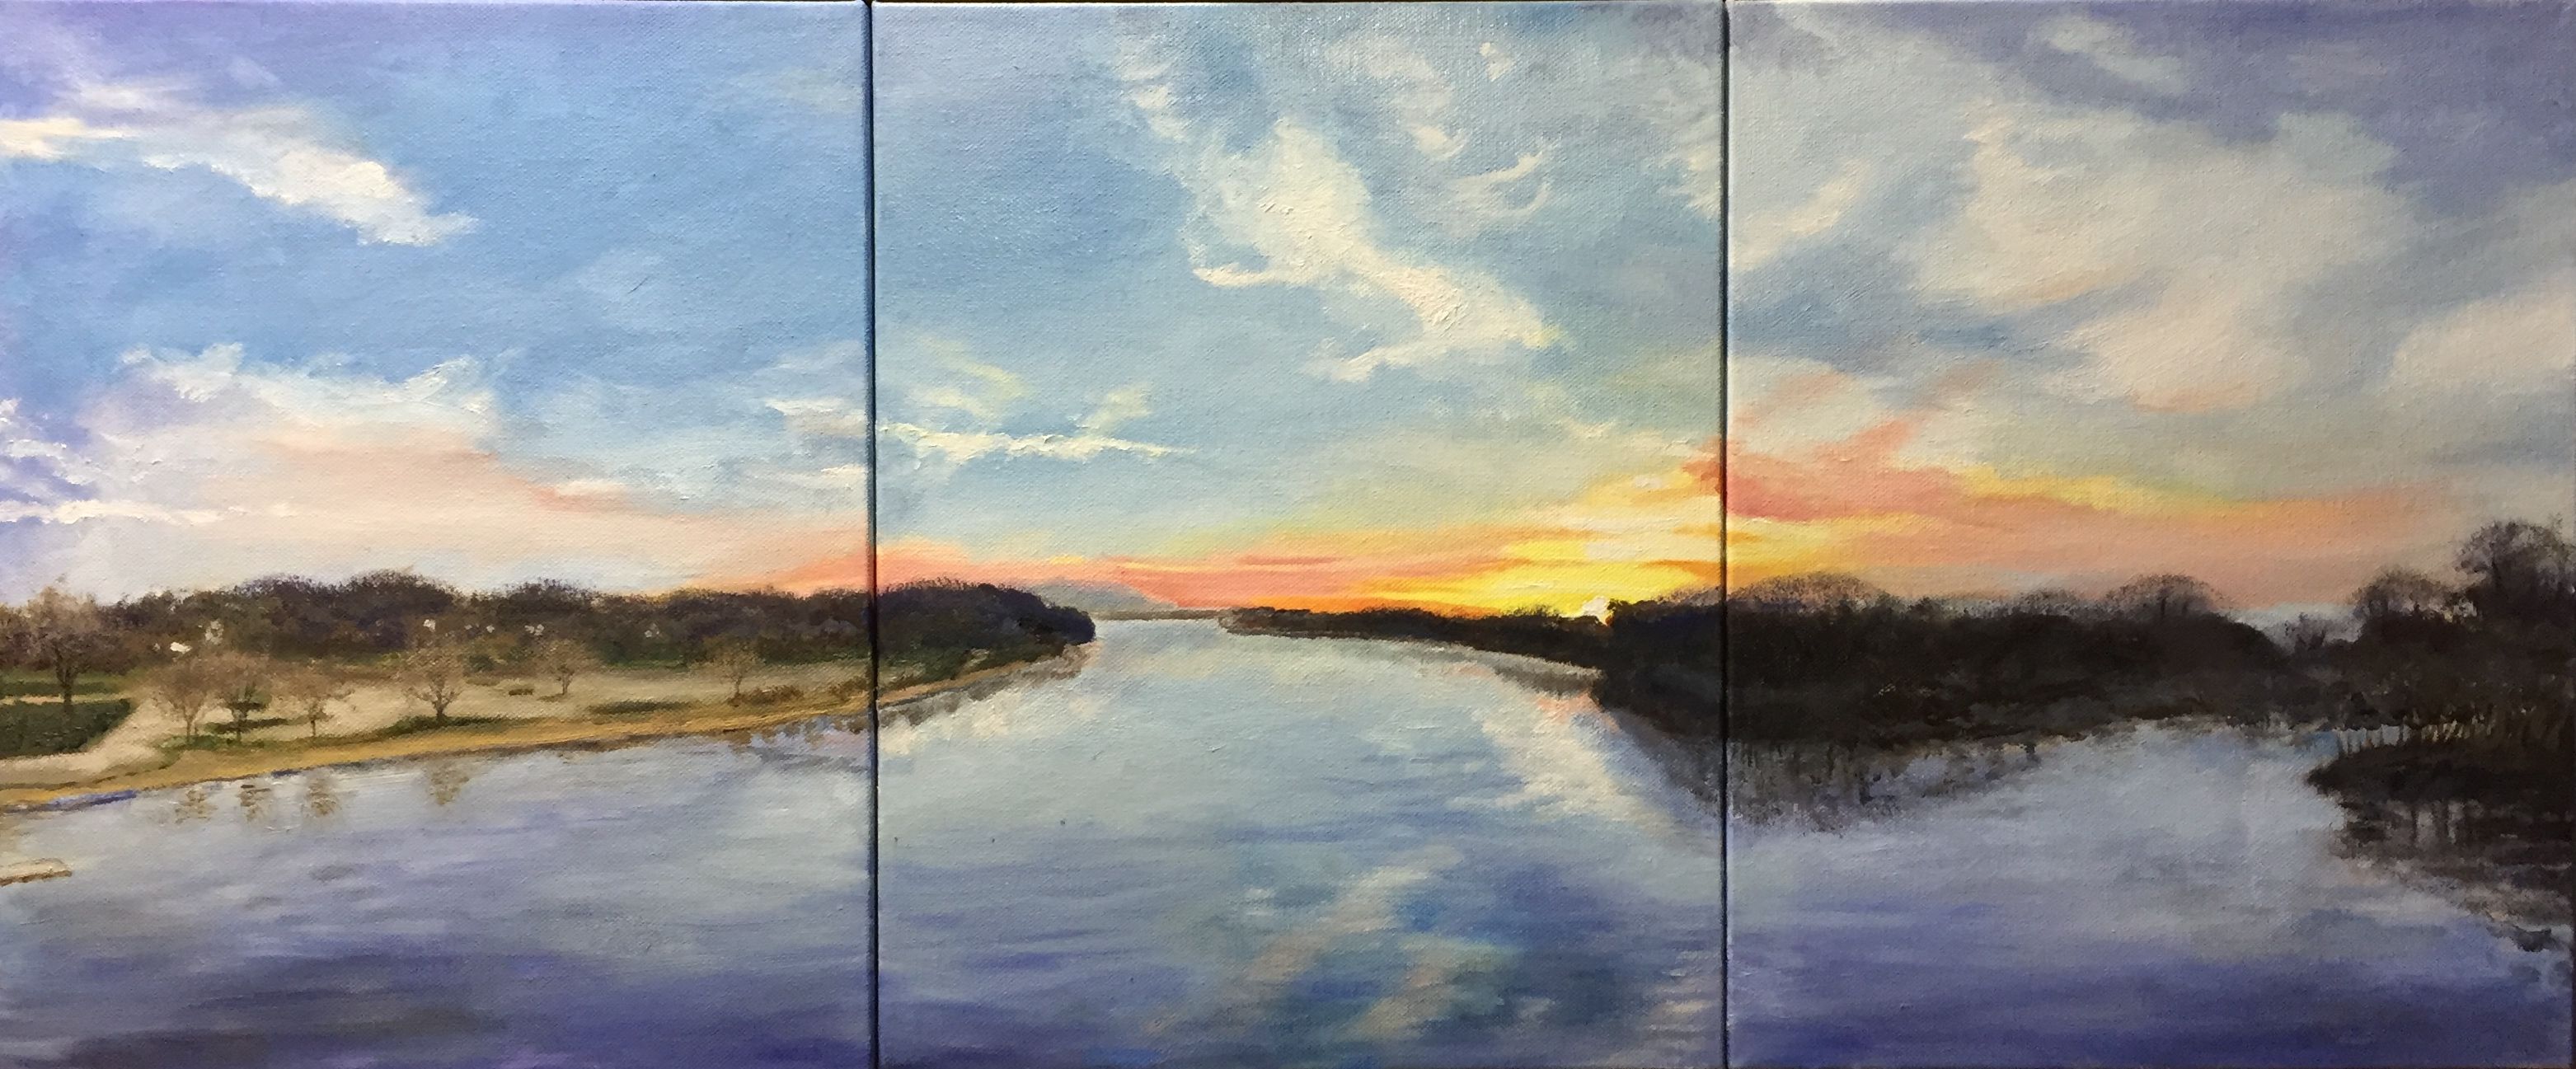 Three 11" x 14" canvases depicting views from the Illinois River bridge in Morris, IL. Oil on canvas